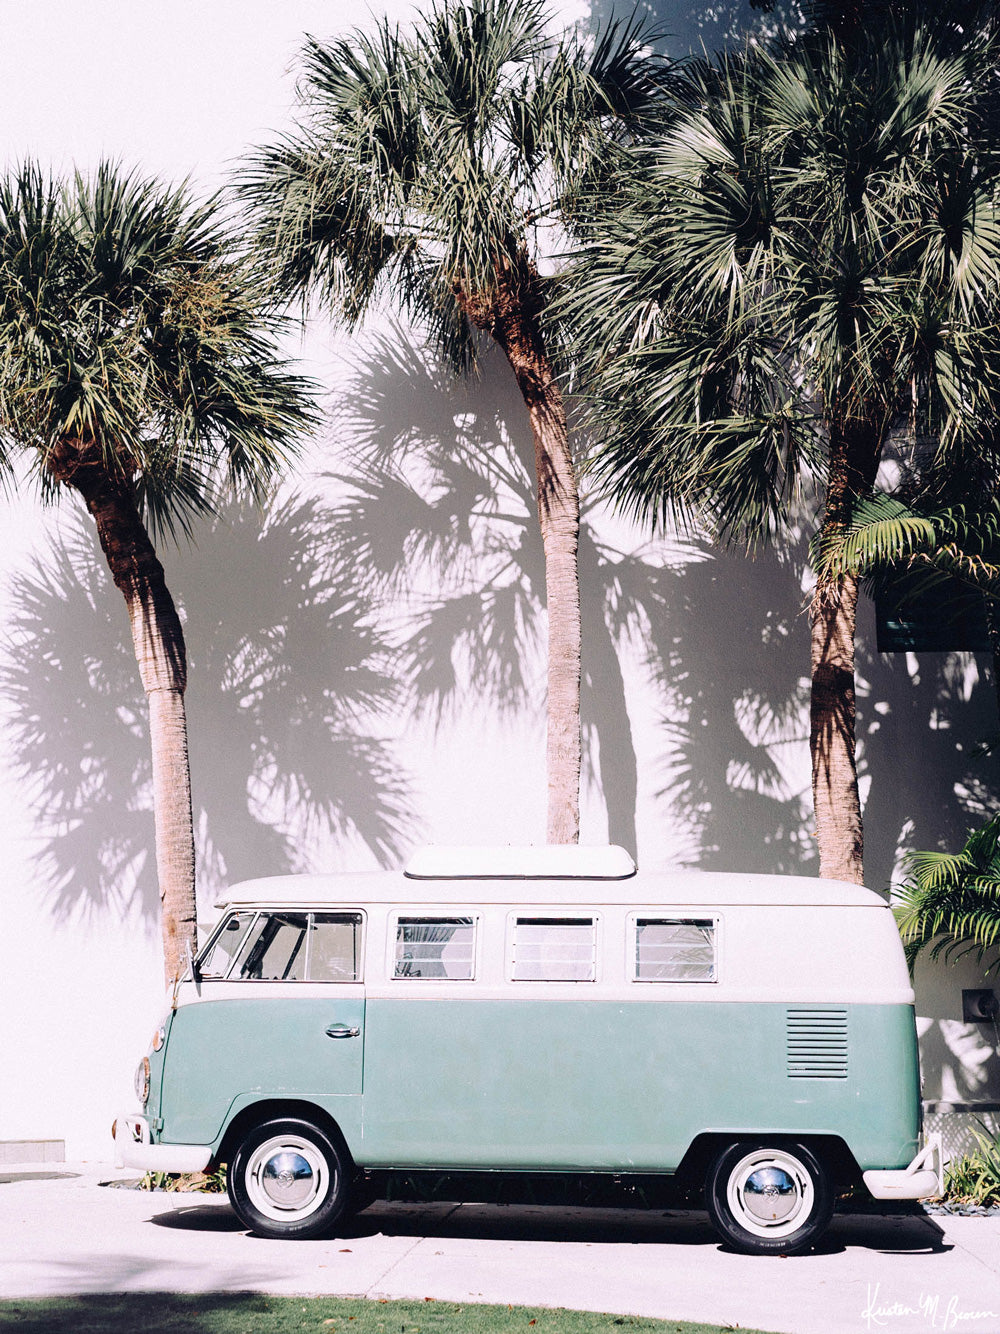 Life is simple - - surf 🏄🏼‍♀️ , jam 🎸, live life in a VW Van 🚌 . Channel those carefree, summertime beach days at home with this turquoise VW bus print. Palmetto Bus print by Kristen M. Brown, Samba to the Sea.